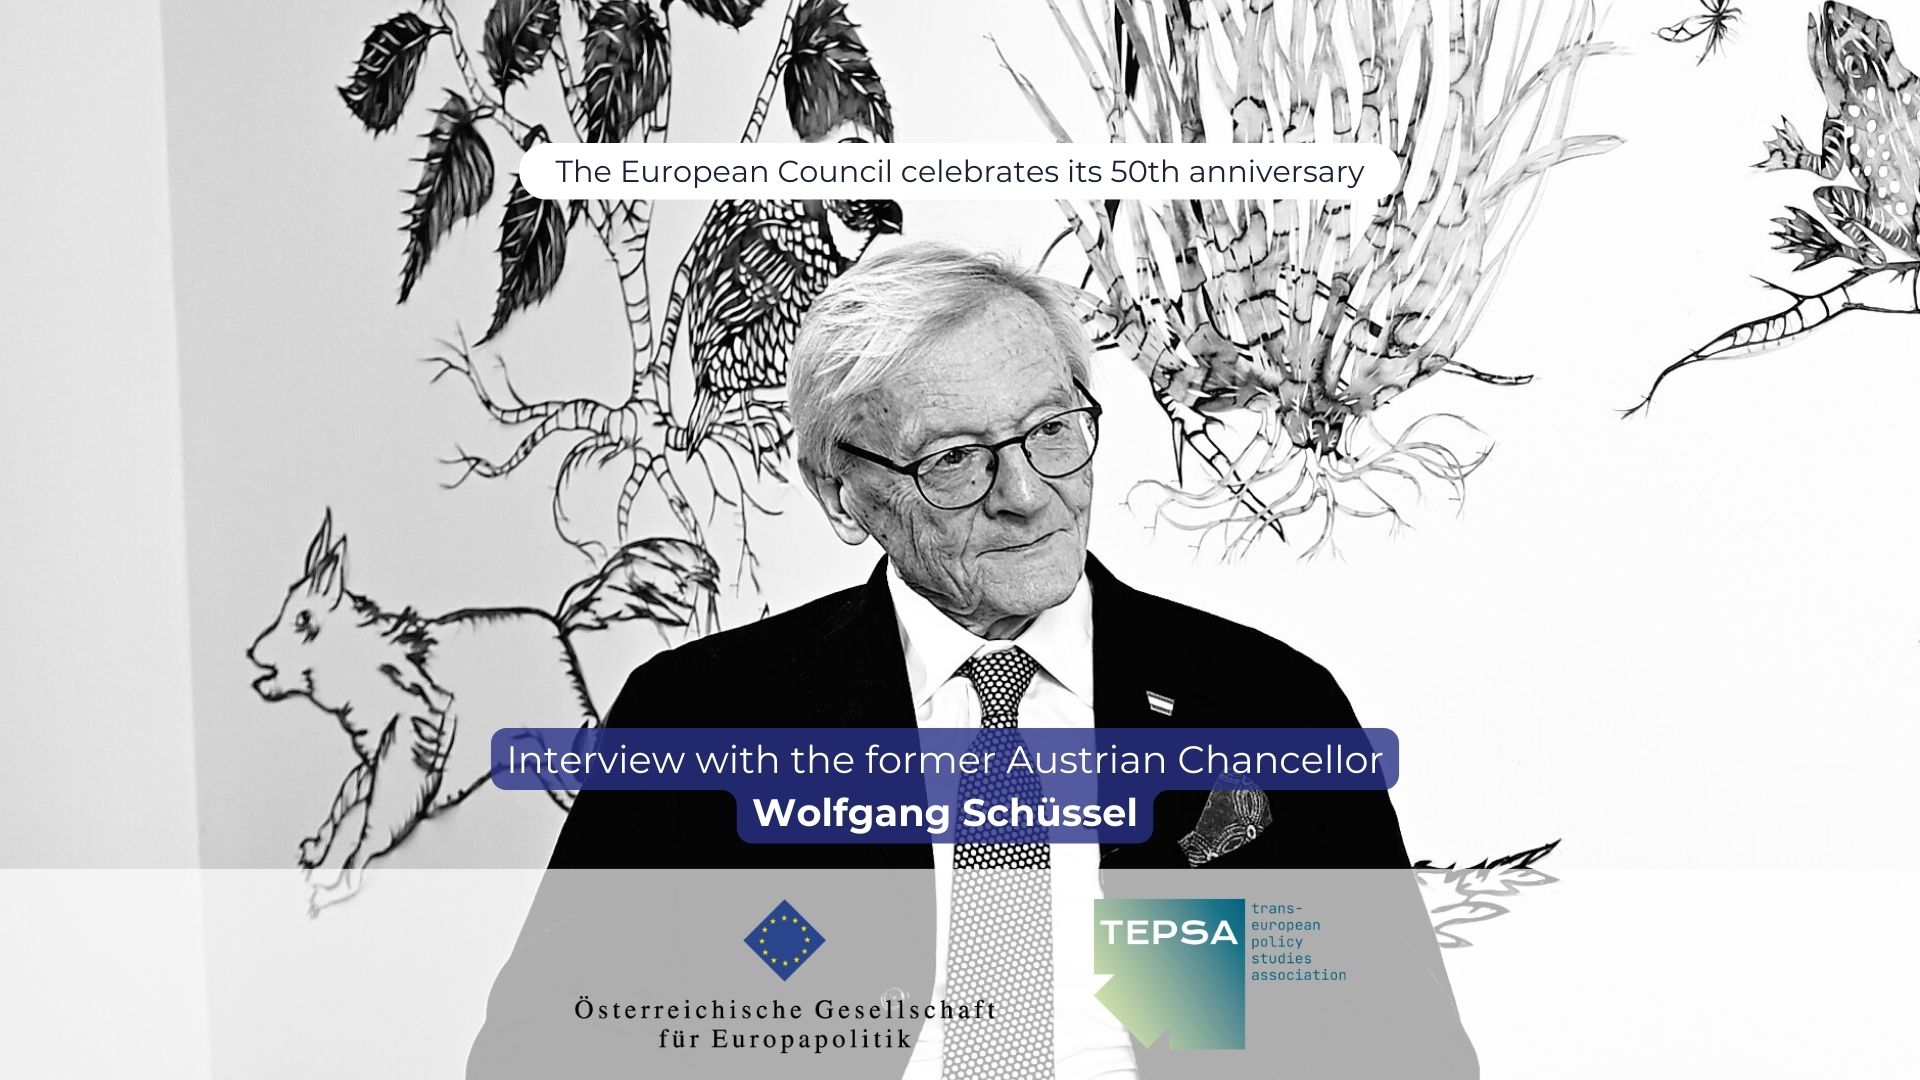 Interview with the former Austrian Chancellor Wolfgang Schüssel to mark the 50th anniversary of the European Council